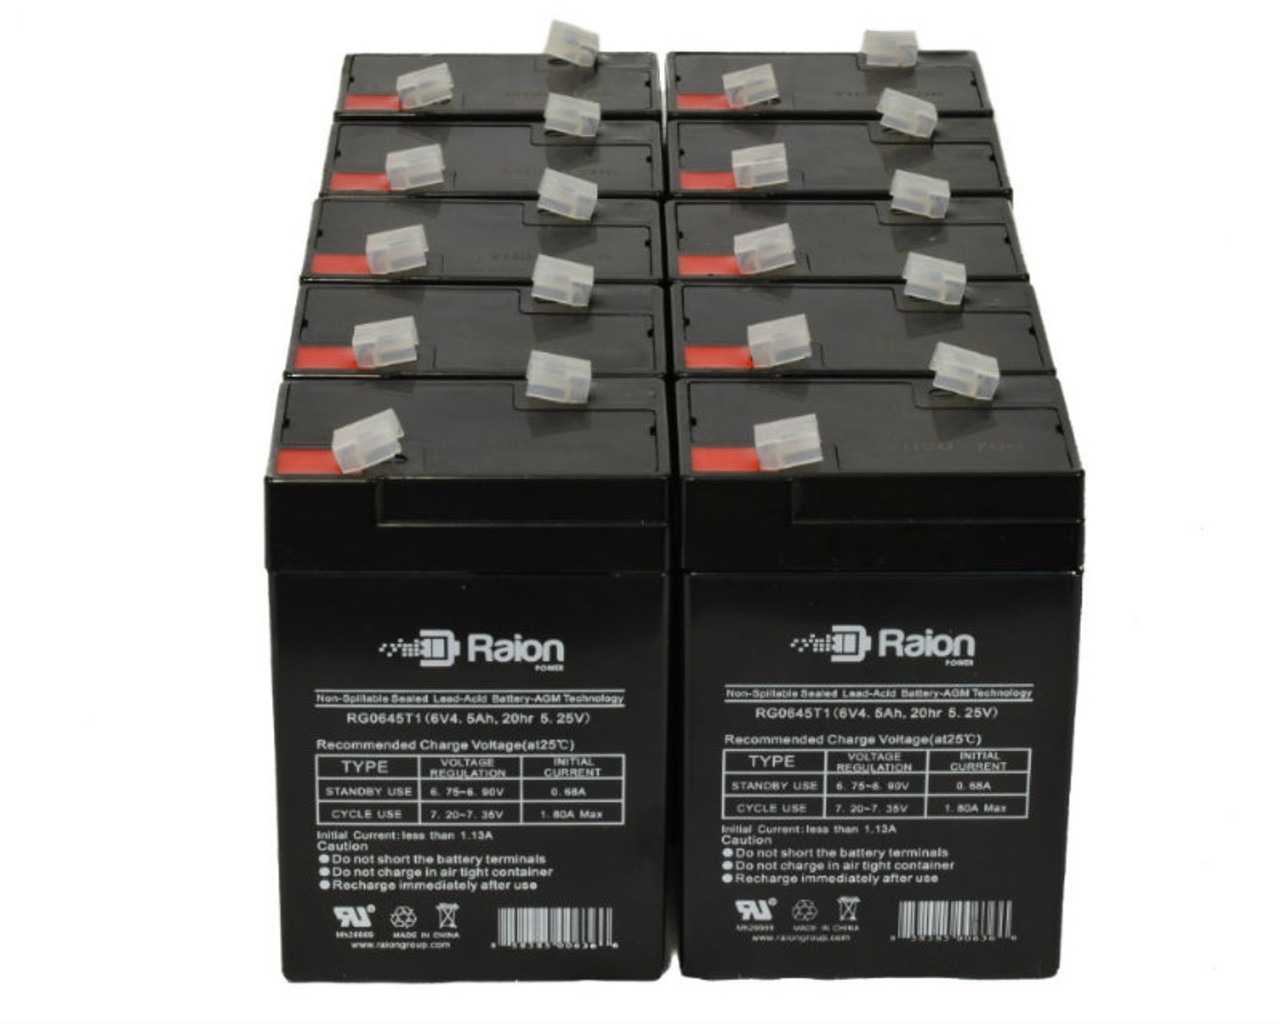 Raion Power 6 Volt 4.5Ah RG0645T1 Replacement Battery for Crown 6CE5 - 10 Pack